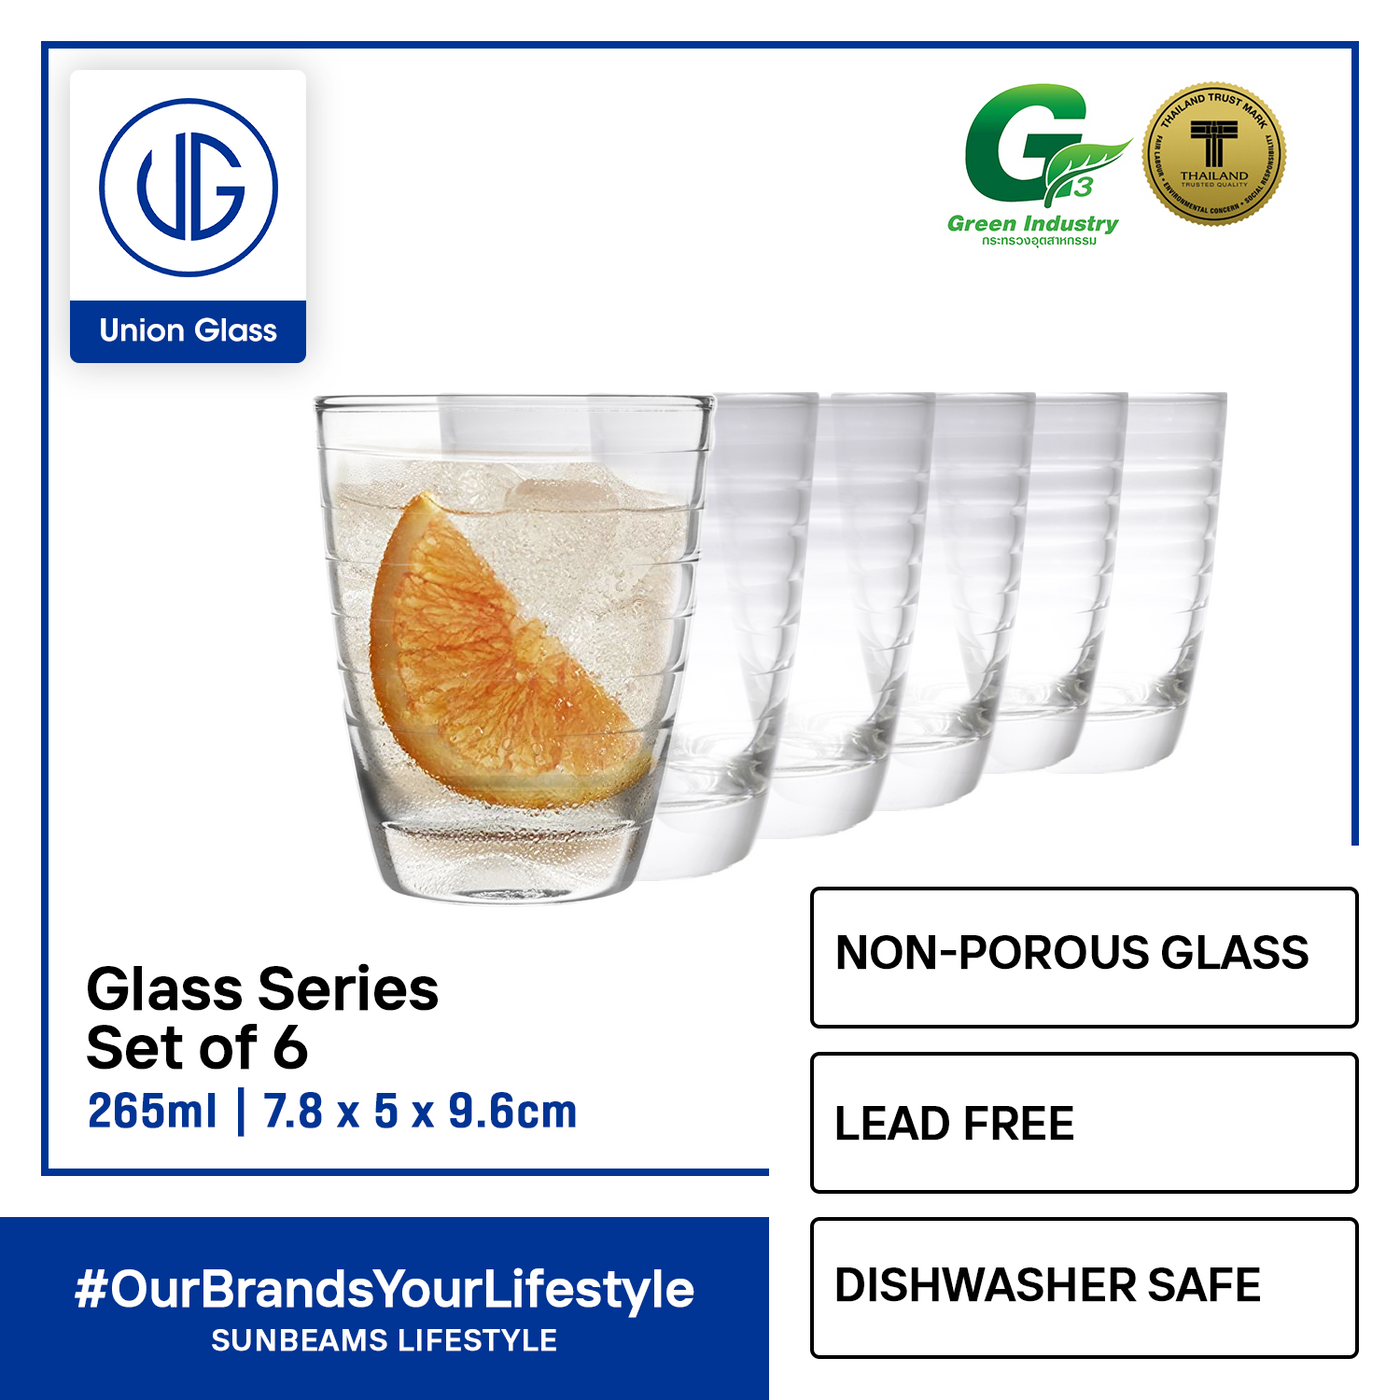 UNION GLASS Thailand Premium Clear Glass Rock Glass Water, Juice, Soda, Liquor Glass 265ml Set of 6 Amazing Gift Idea For Any Occasion!